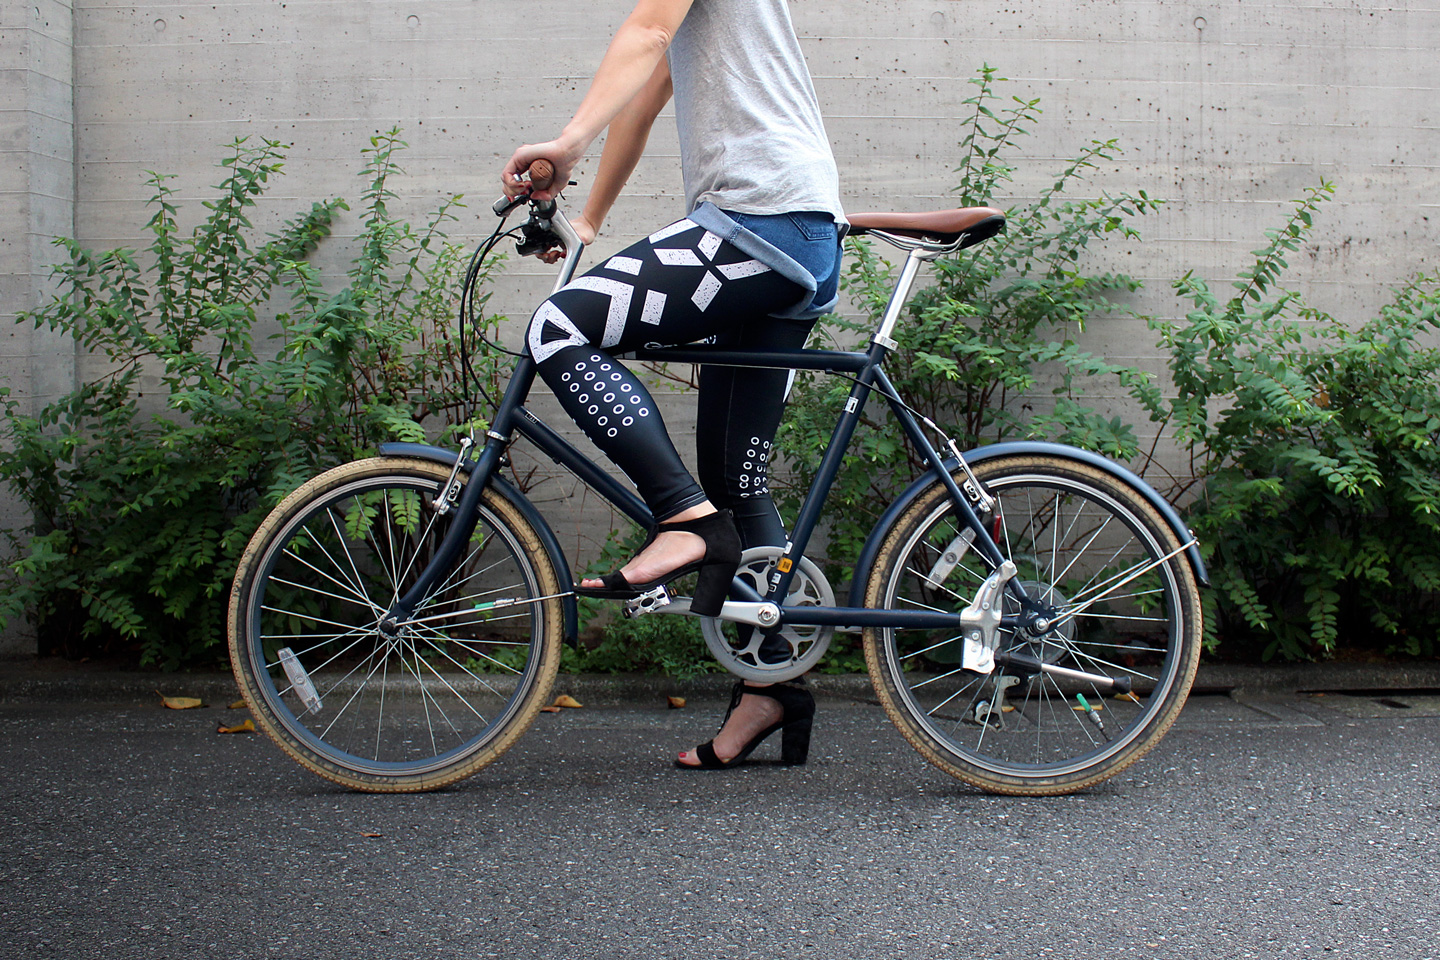 Tokyo Signs - Products inspired by the streets of Tokyo - Roadmarks Leggings